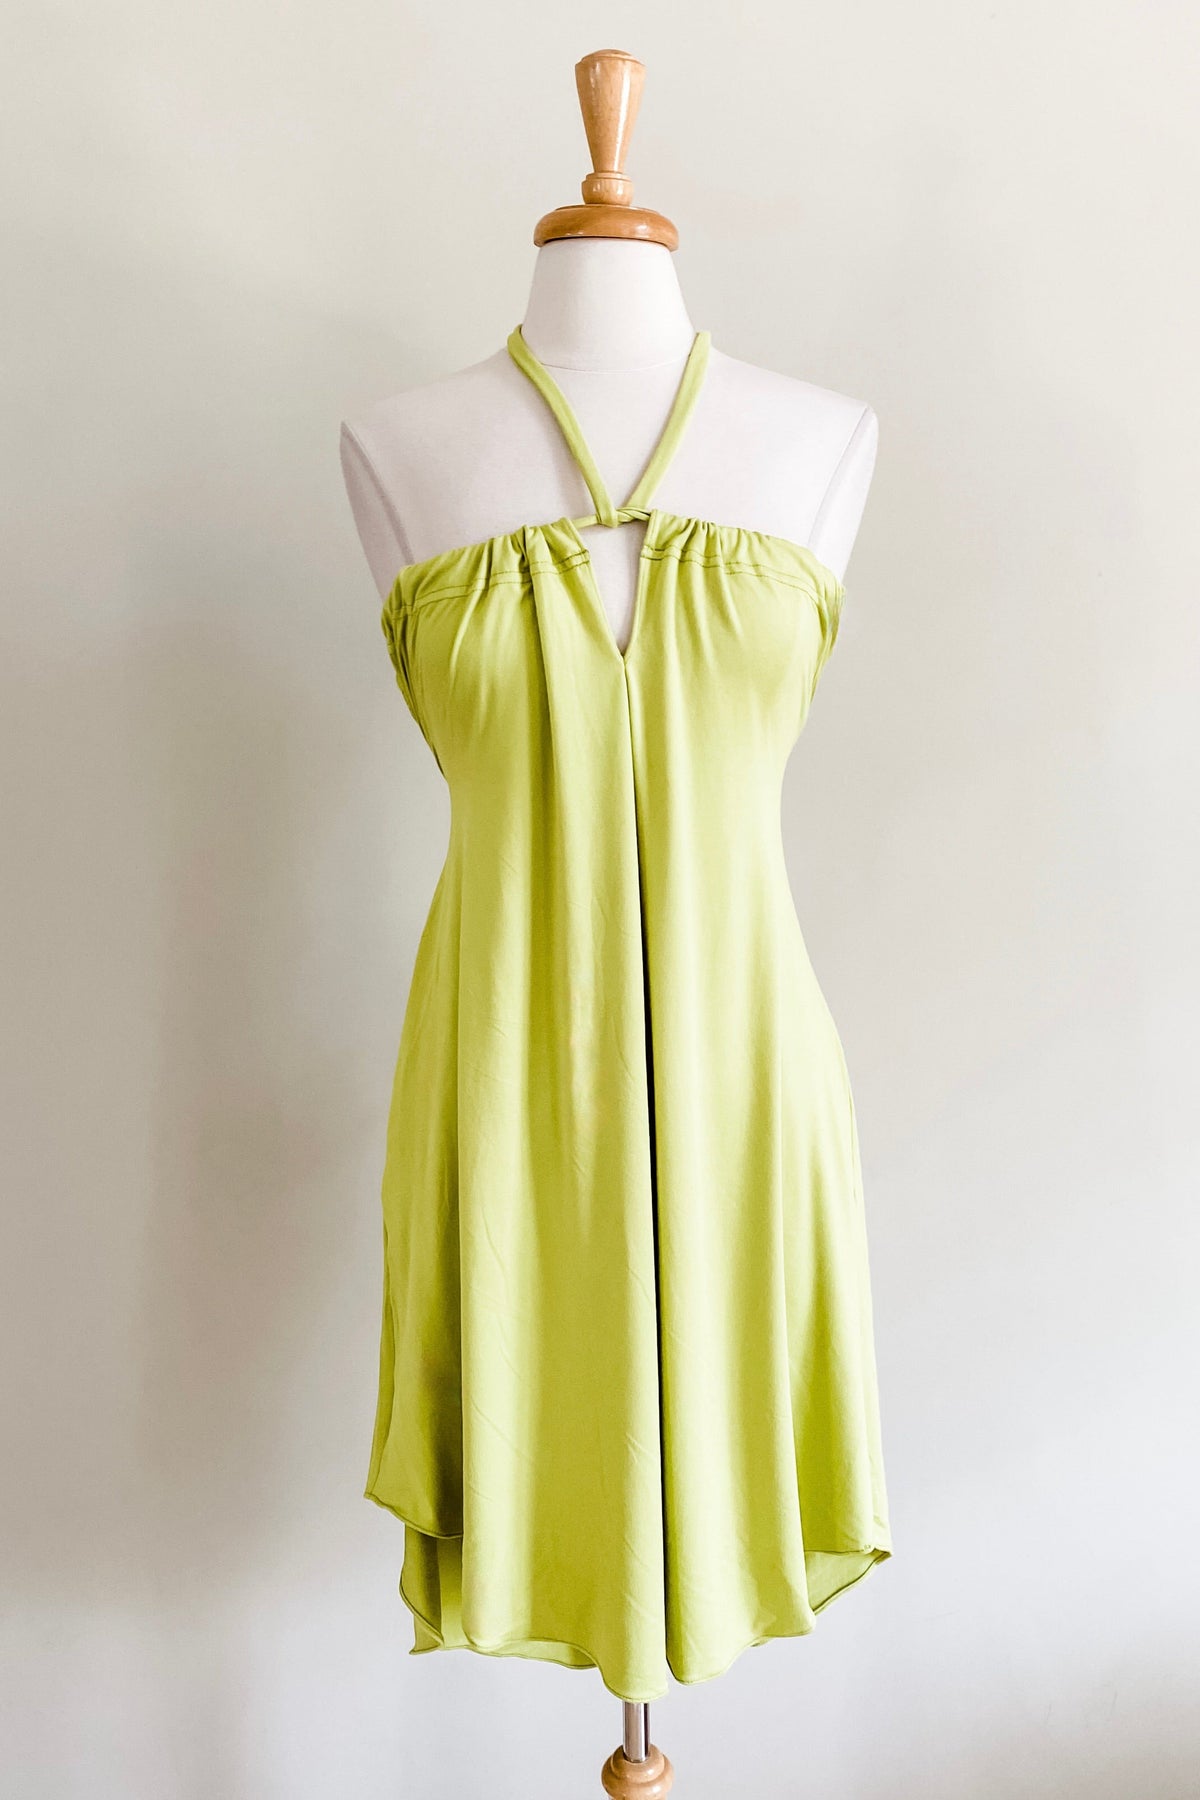 Diane Kroe Evermore Tunic (Chartreuse) - Warm Weather Capsule Collection